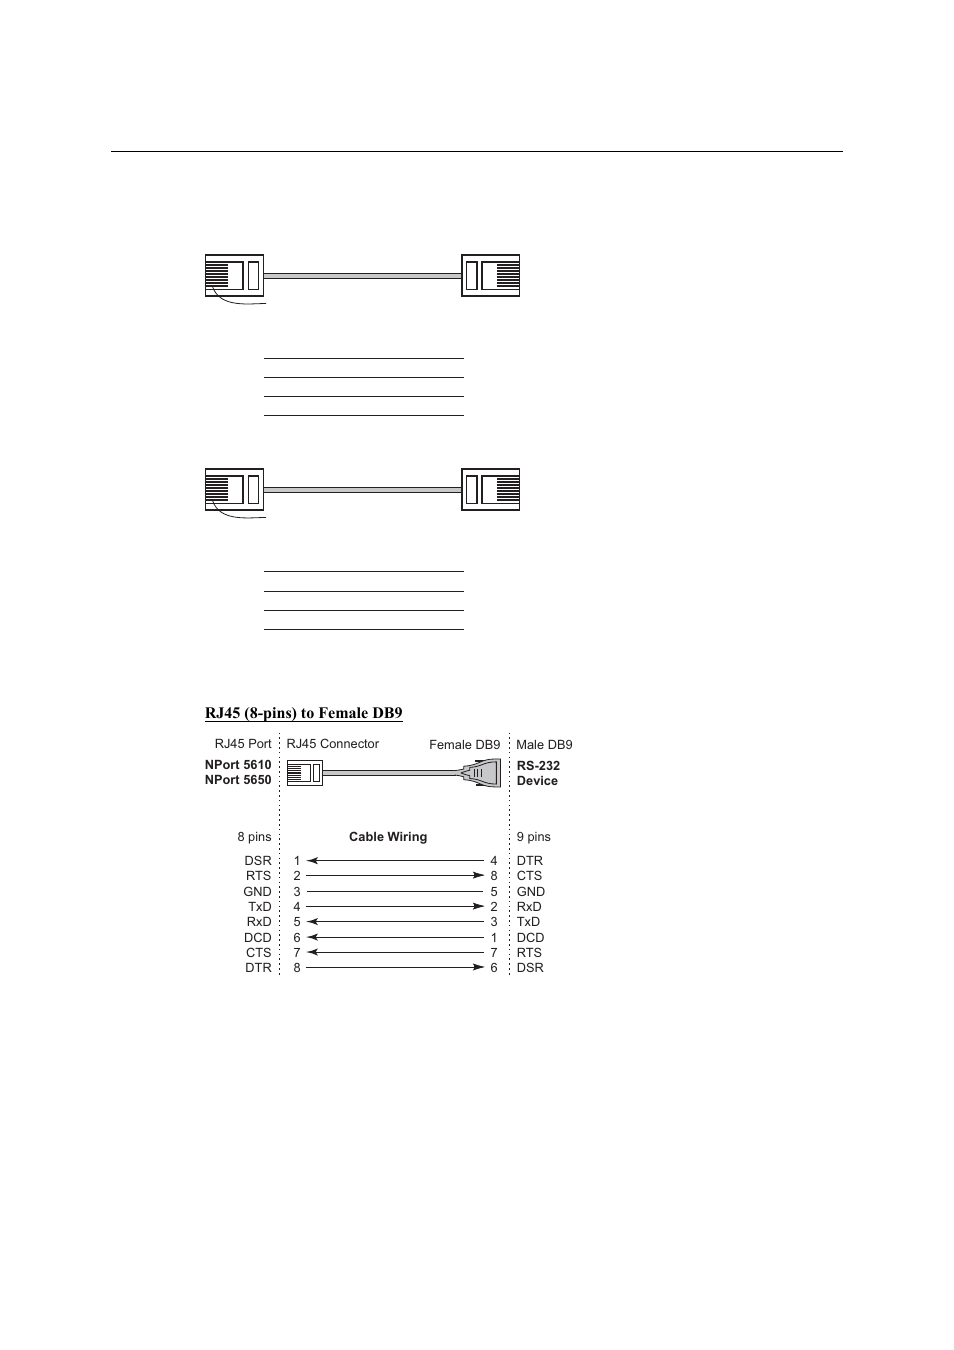 Cable wiring diagrams, Ethernet cables, Serial cables for nport 5610/5650  (rs-232) | Moxa Technologies NPort 5600 User Manual | Page 101 / 119 |  Original mode